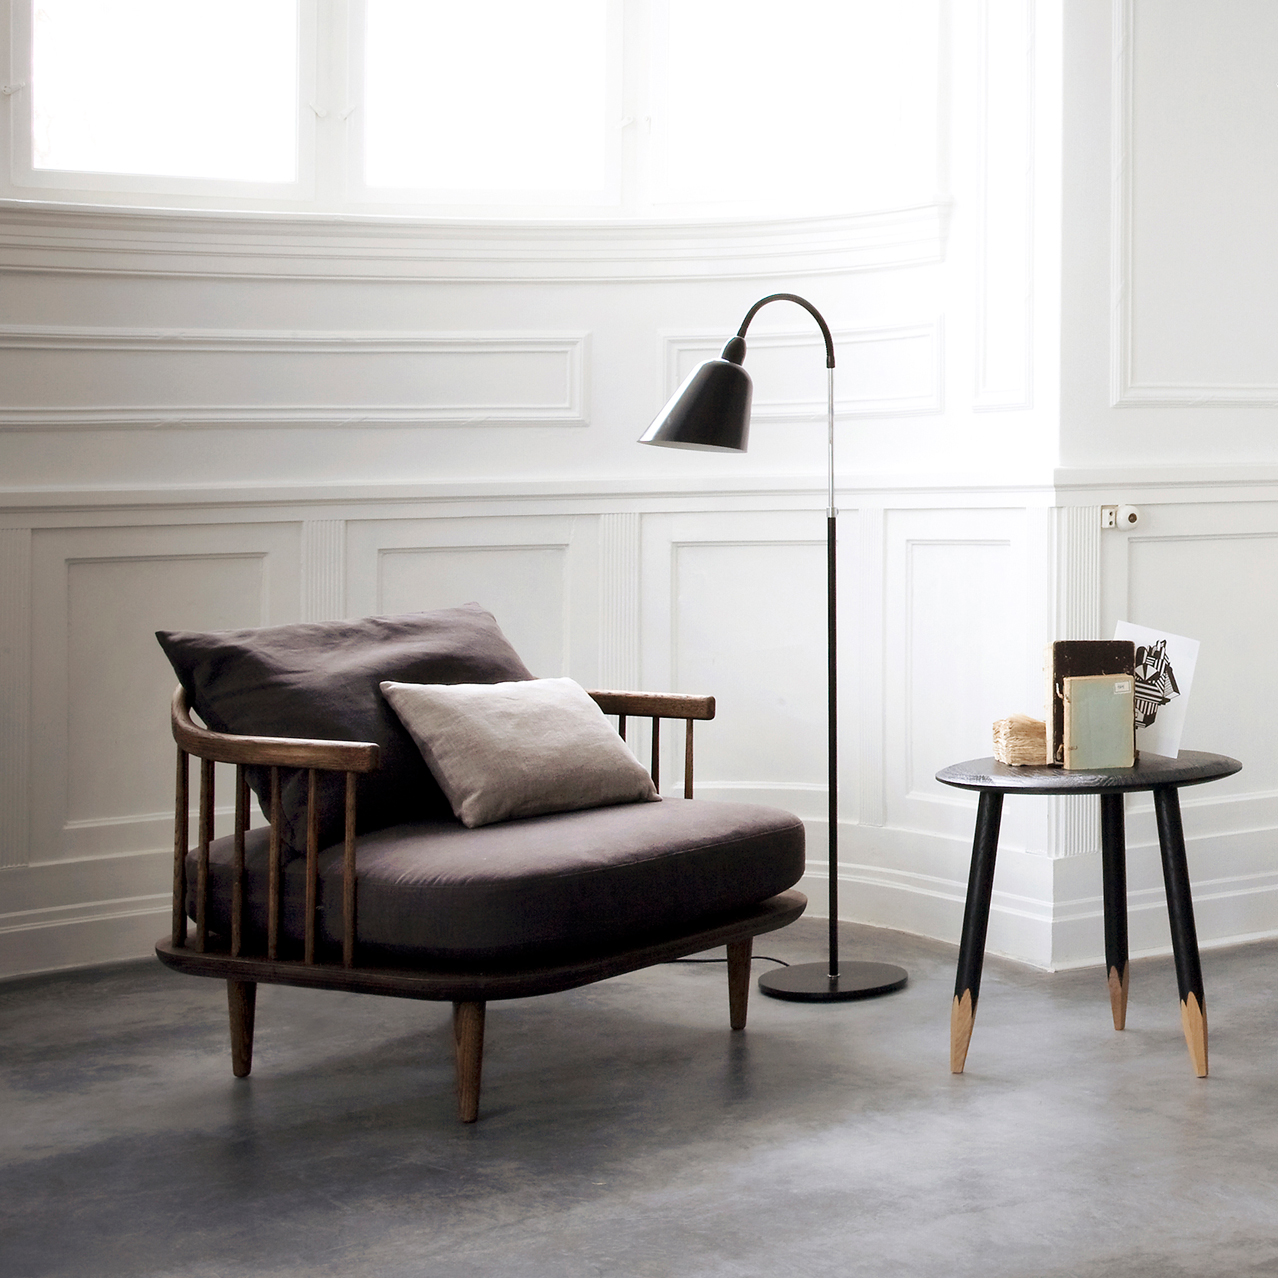 &Tradition - Fly Chair SC1 | Nordic Urban - Berlin Germany